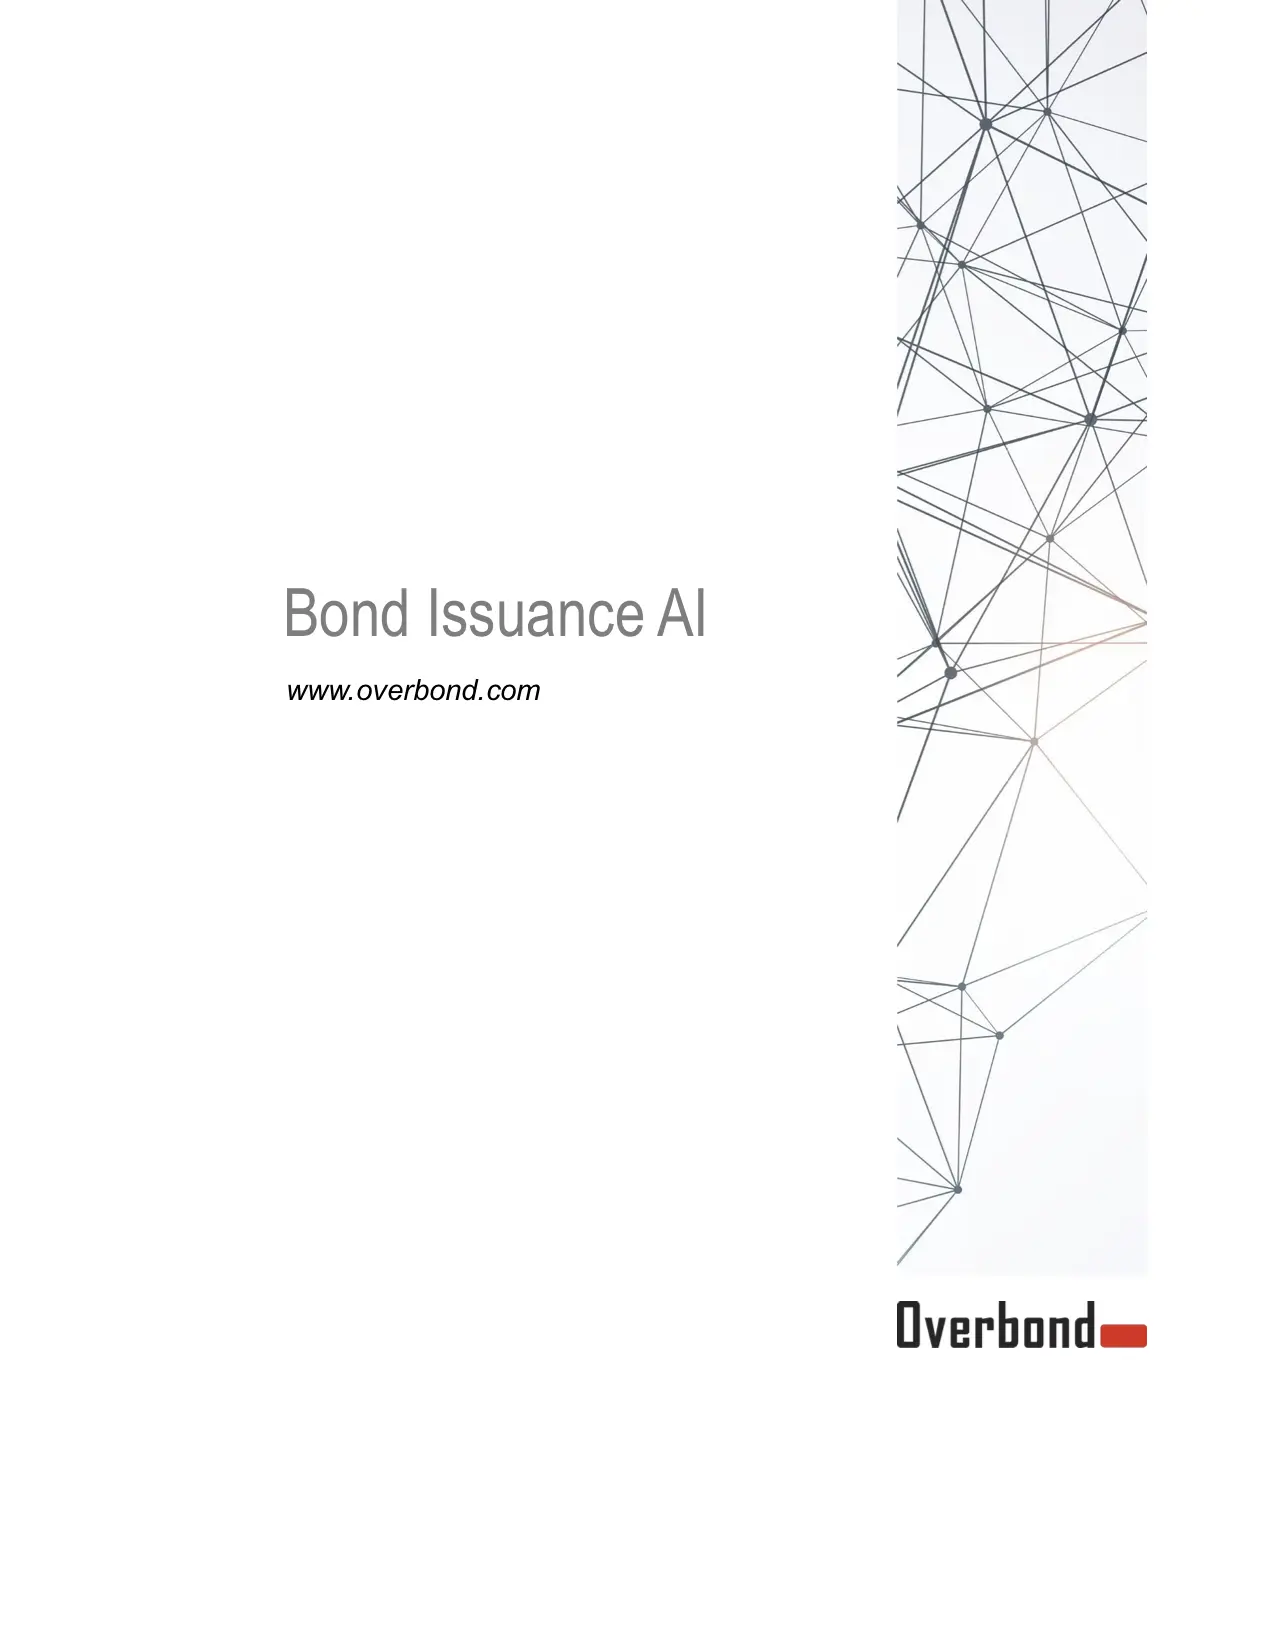 Overbond COBI-Issuance Report